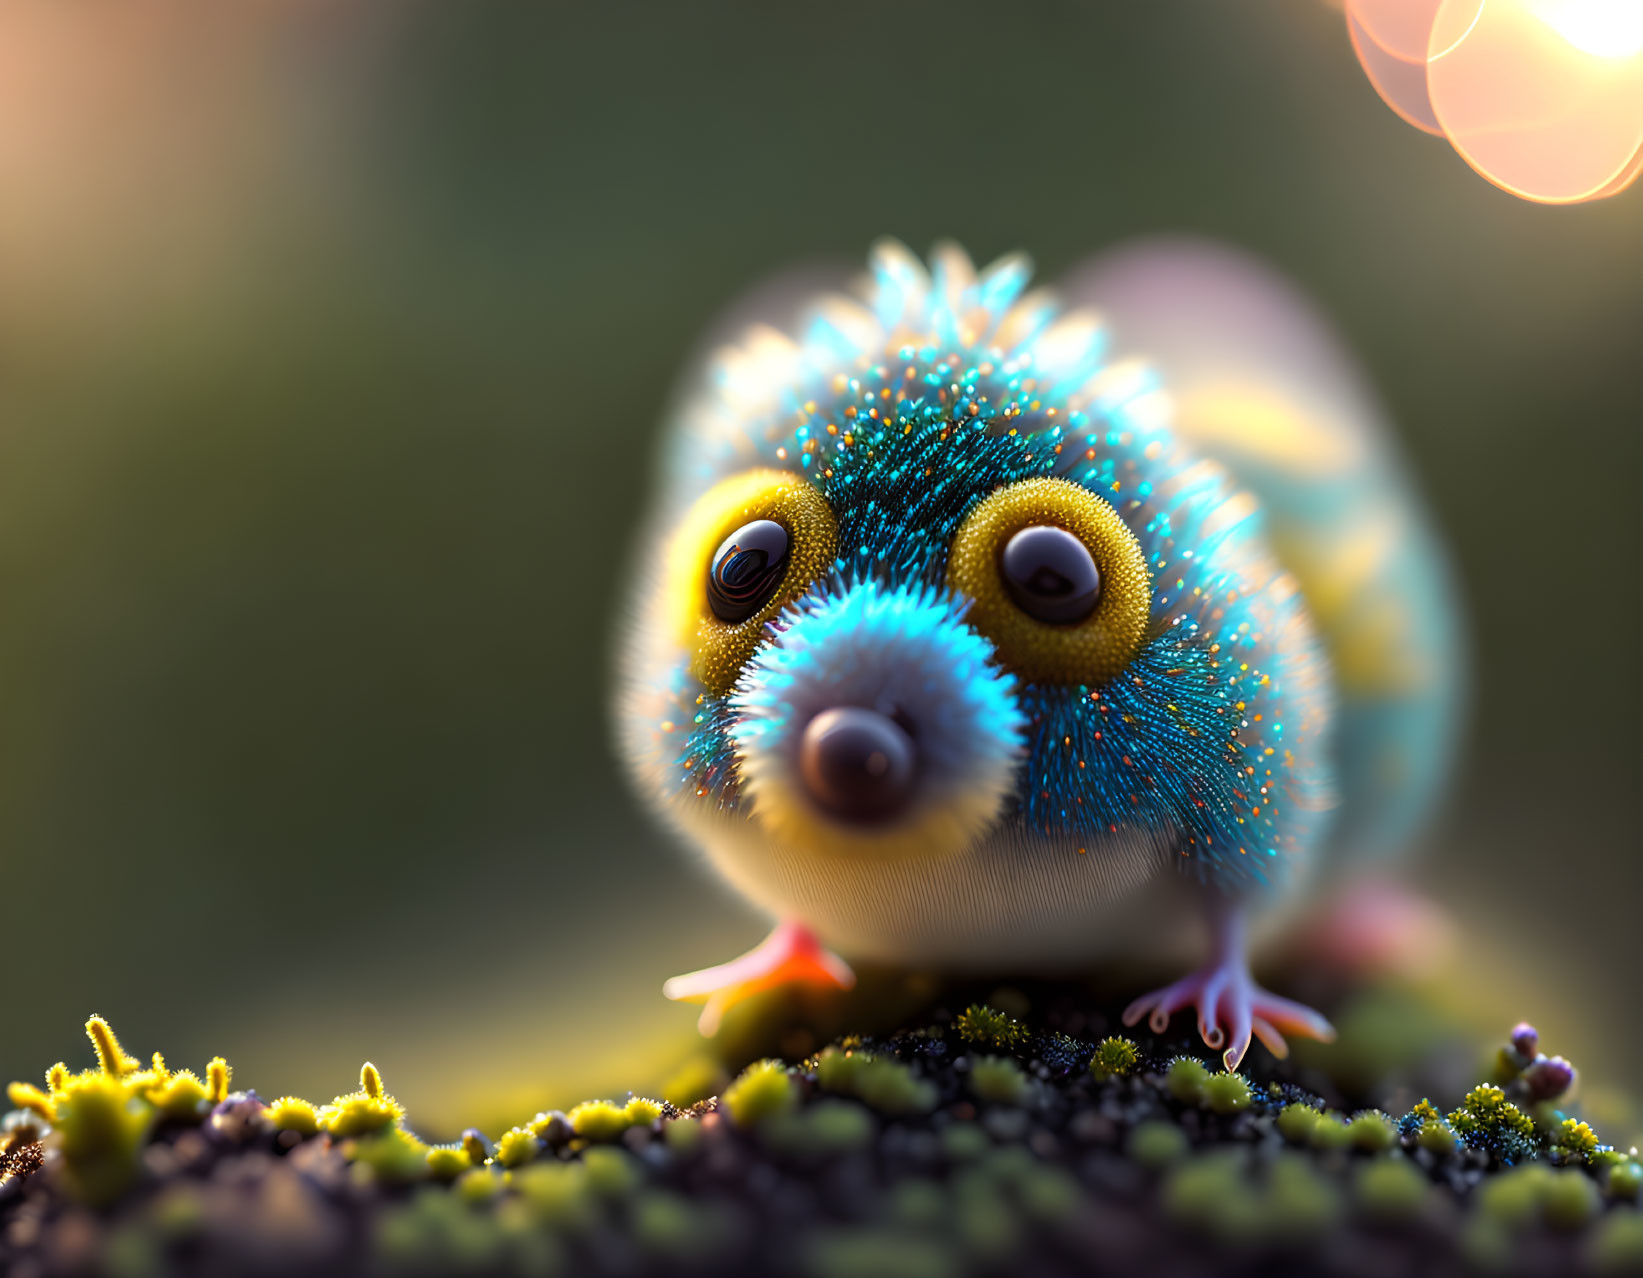 Colorful Cartoon Creature with Blue Spiky Fur on Mossy Surface